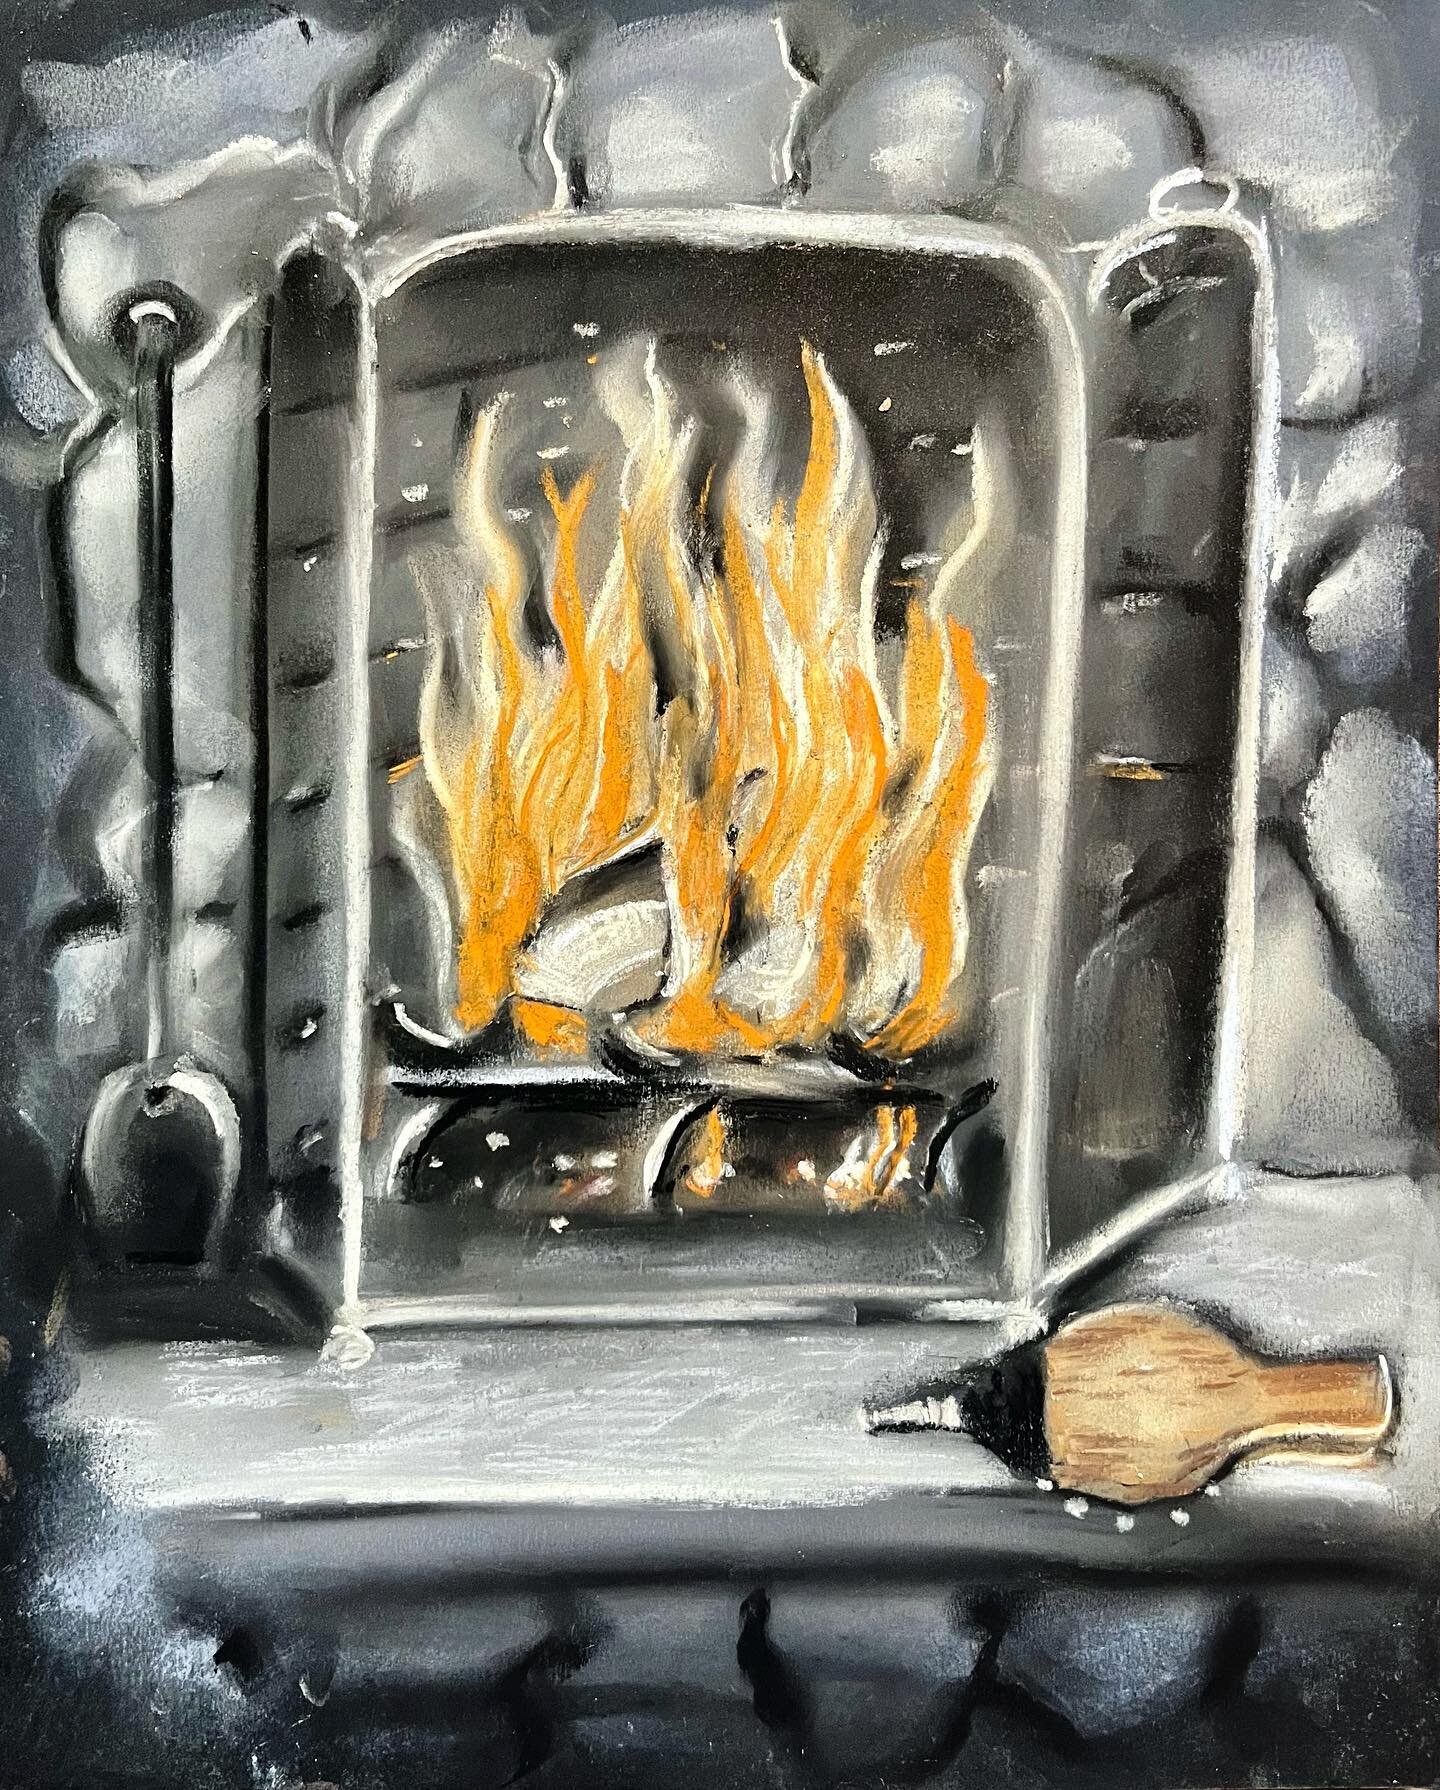 Alexis and Neil&rsquo;s fireplace 
#drawing #fire #pastel #pastelgoth #pasteldrawing #sketchbook #kindeling #flames #firestarter #stone #grate #drawingfire #poker #firepoker